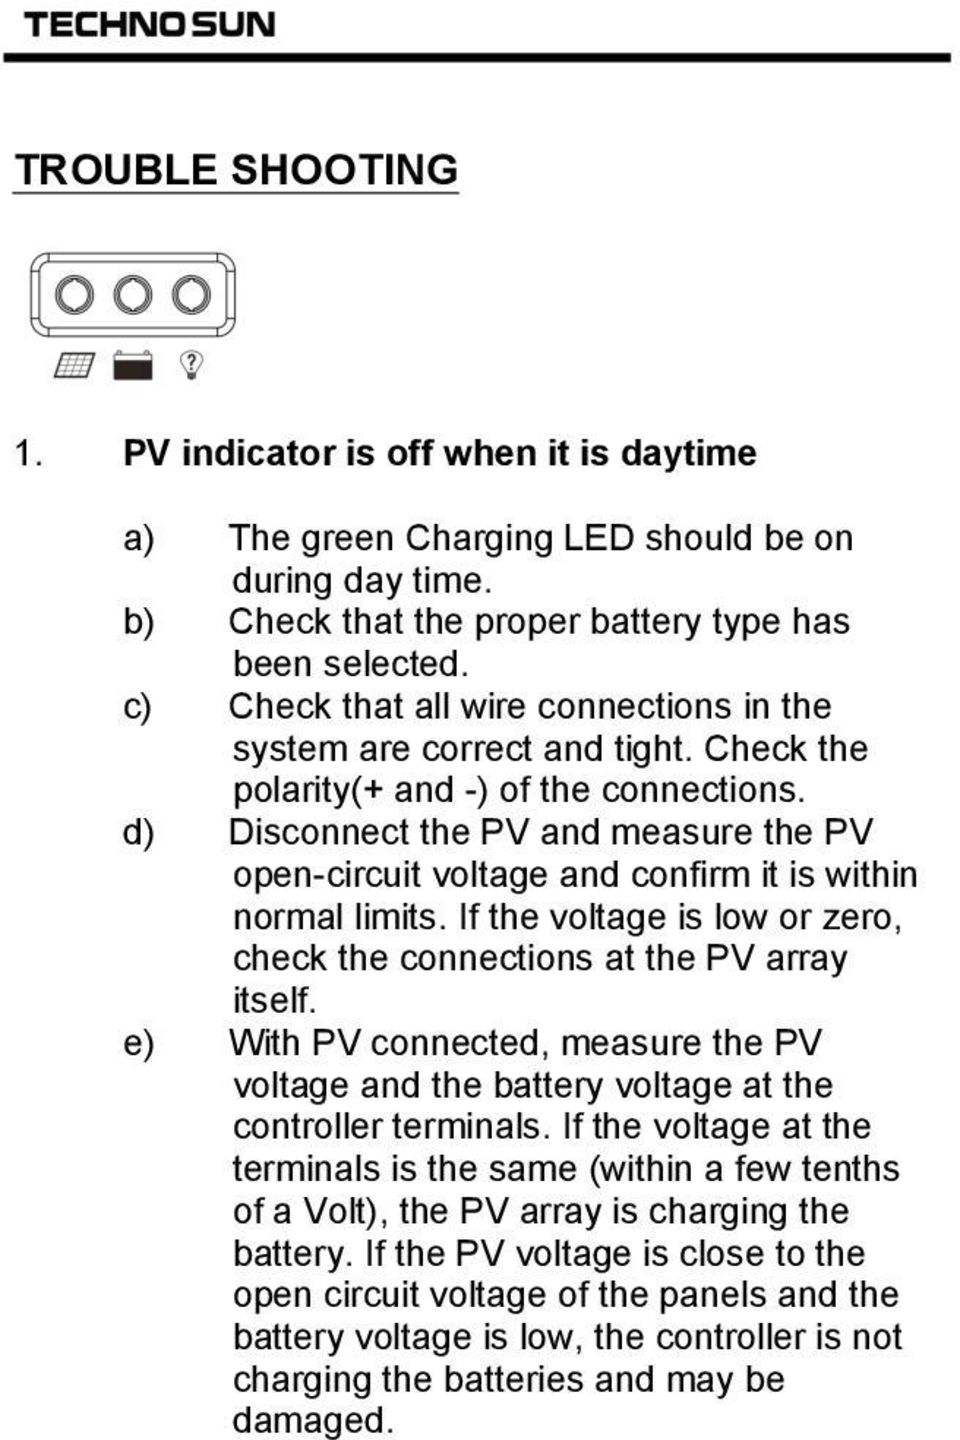 d) Disconnect the PV and measure the PV open-circuit voltage and confirm it is within normal limits. If the voltage is low or zero, check the connections at the PV array itself.